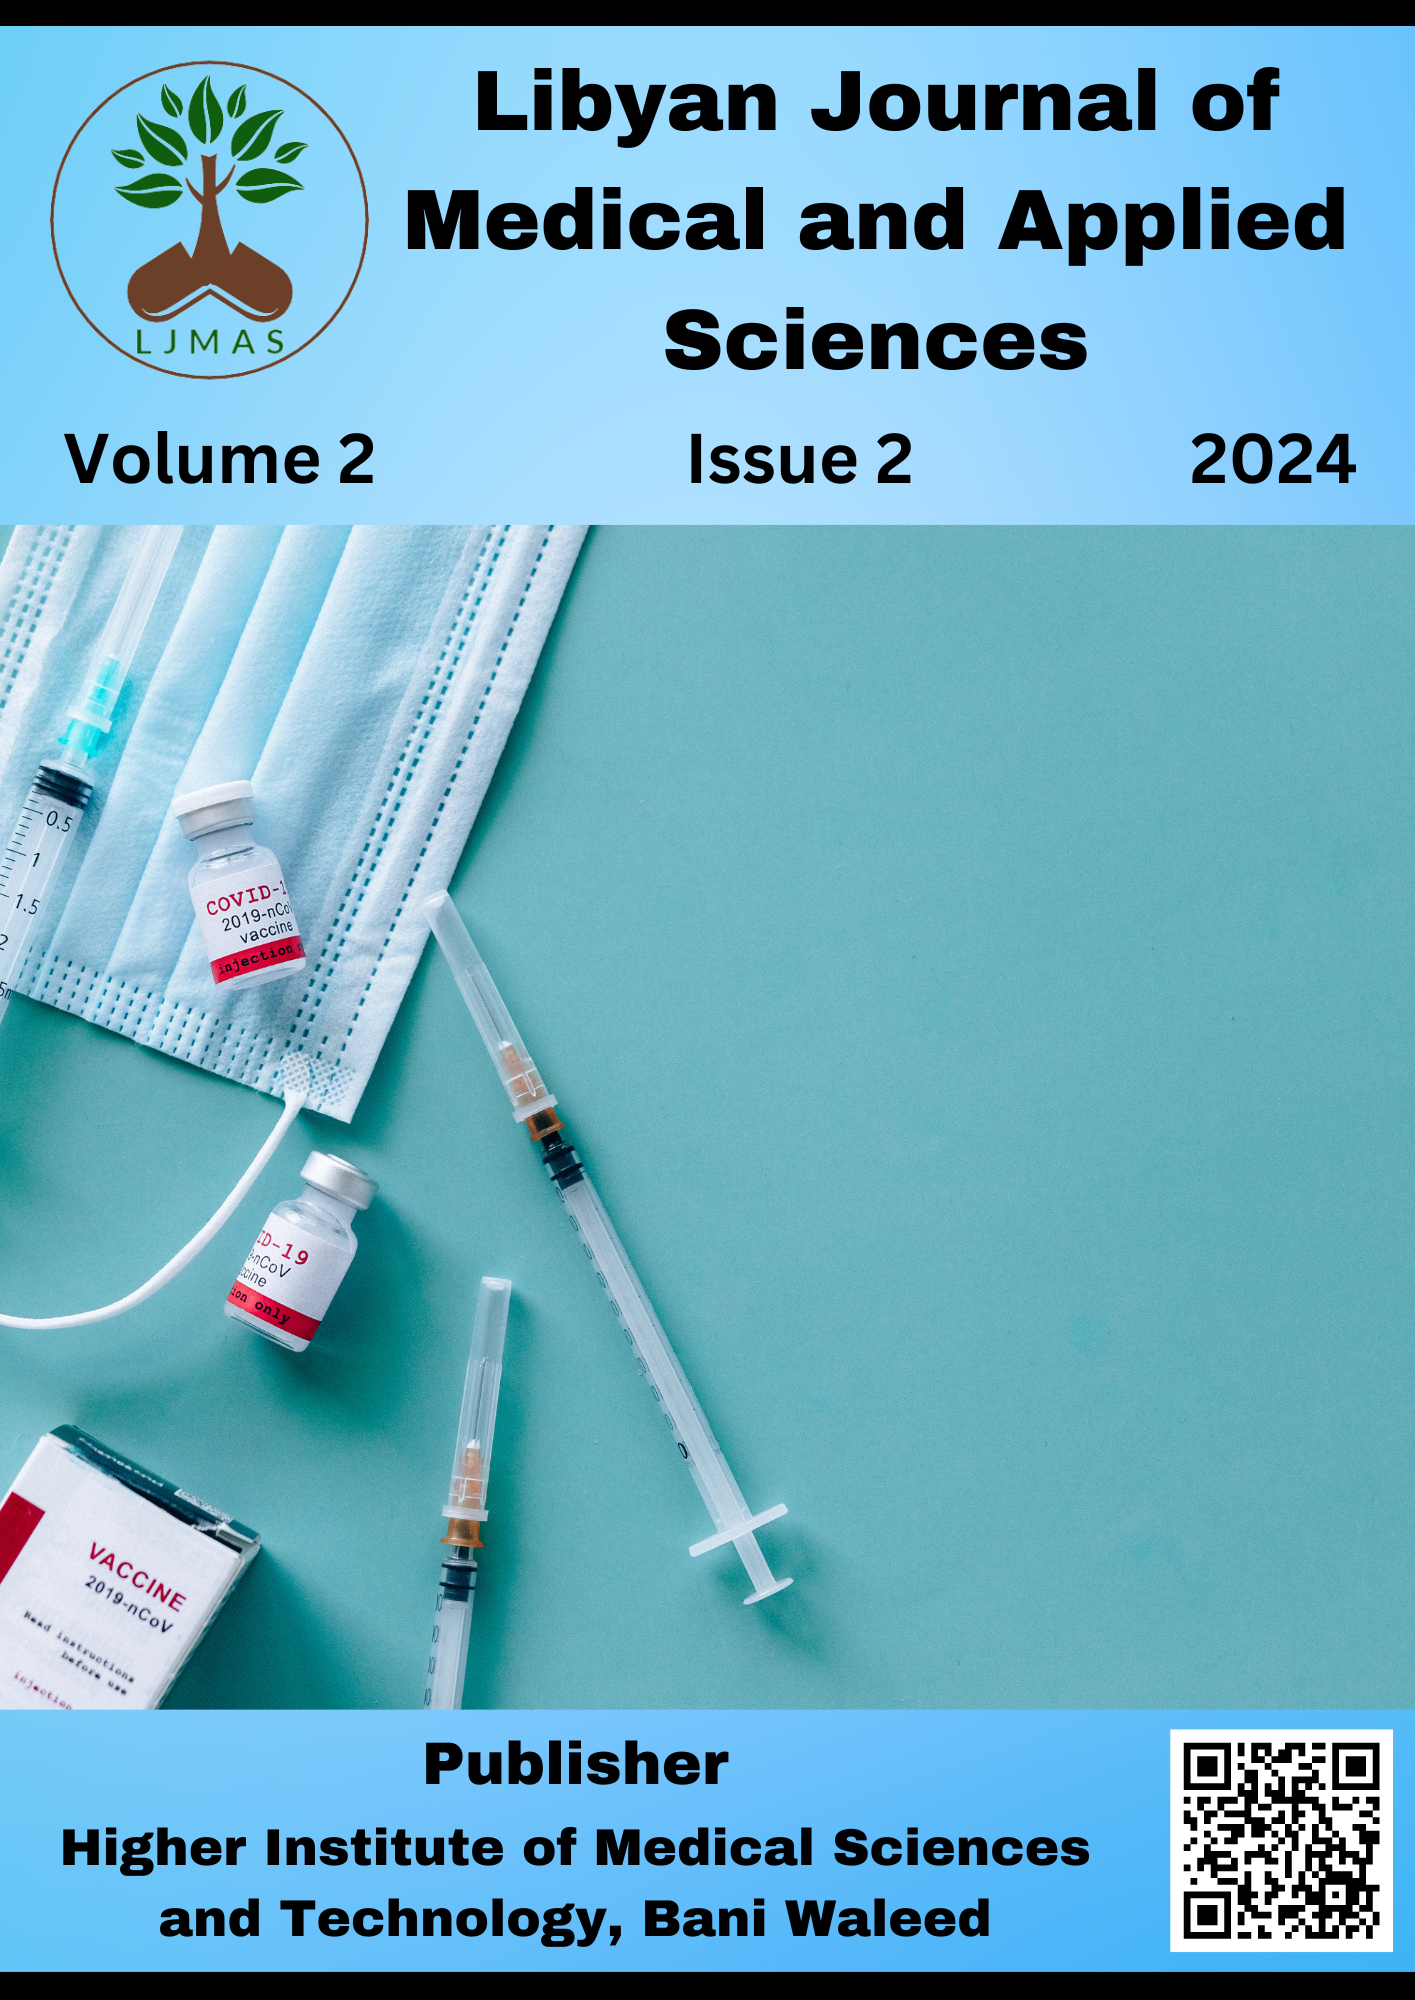 					View Volume 2, Issue 2, 2024
				